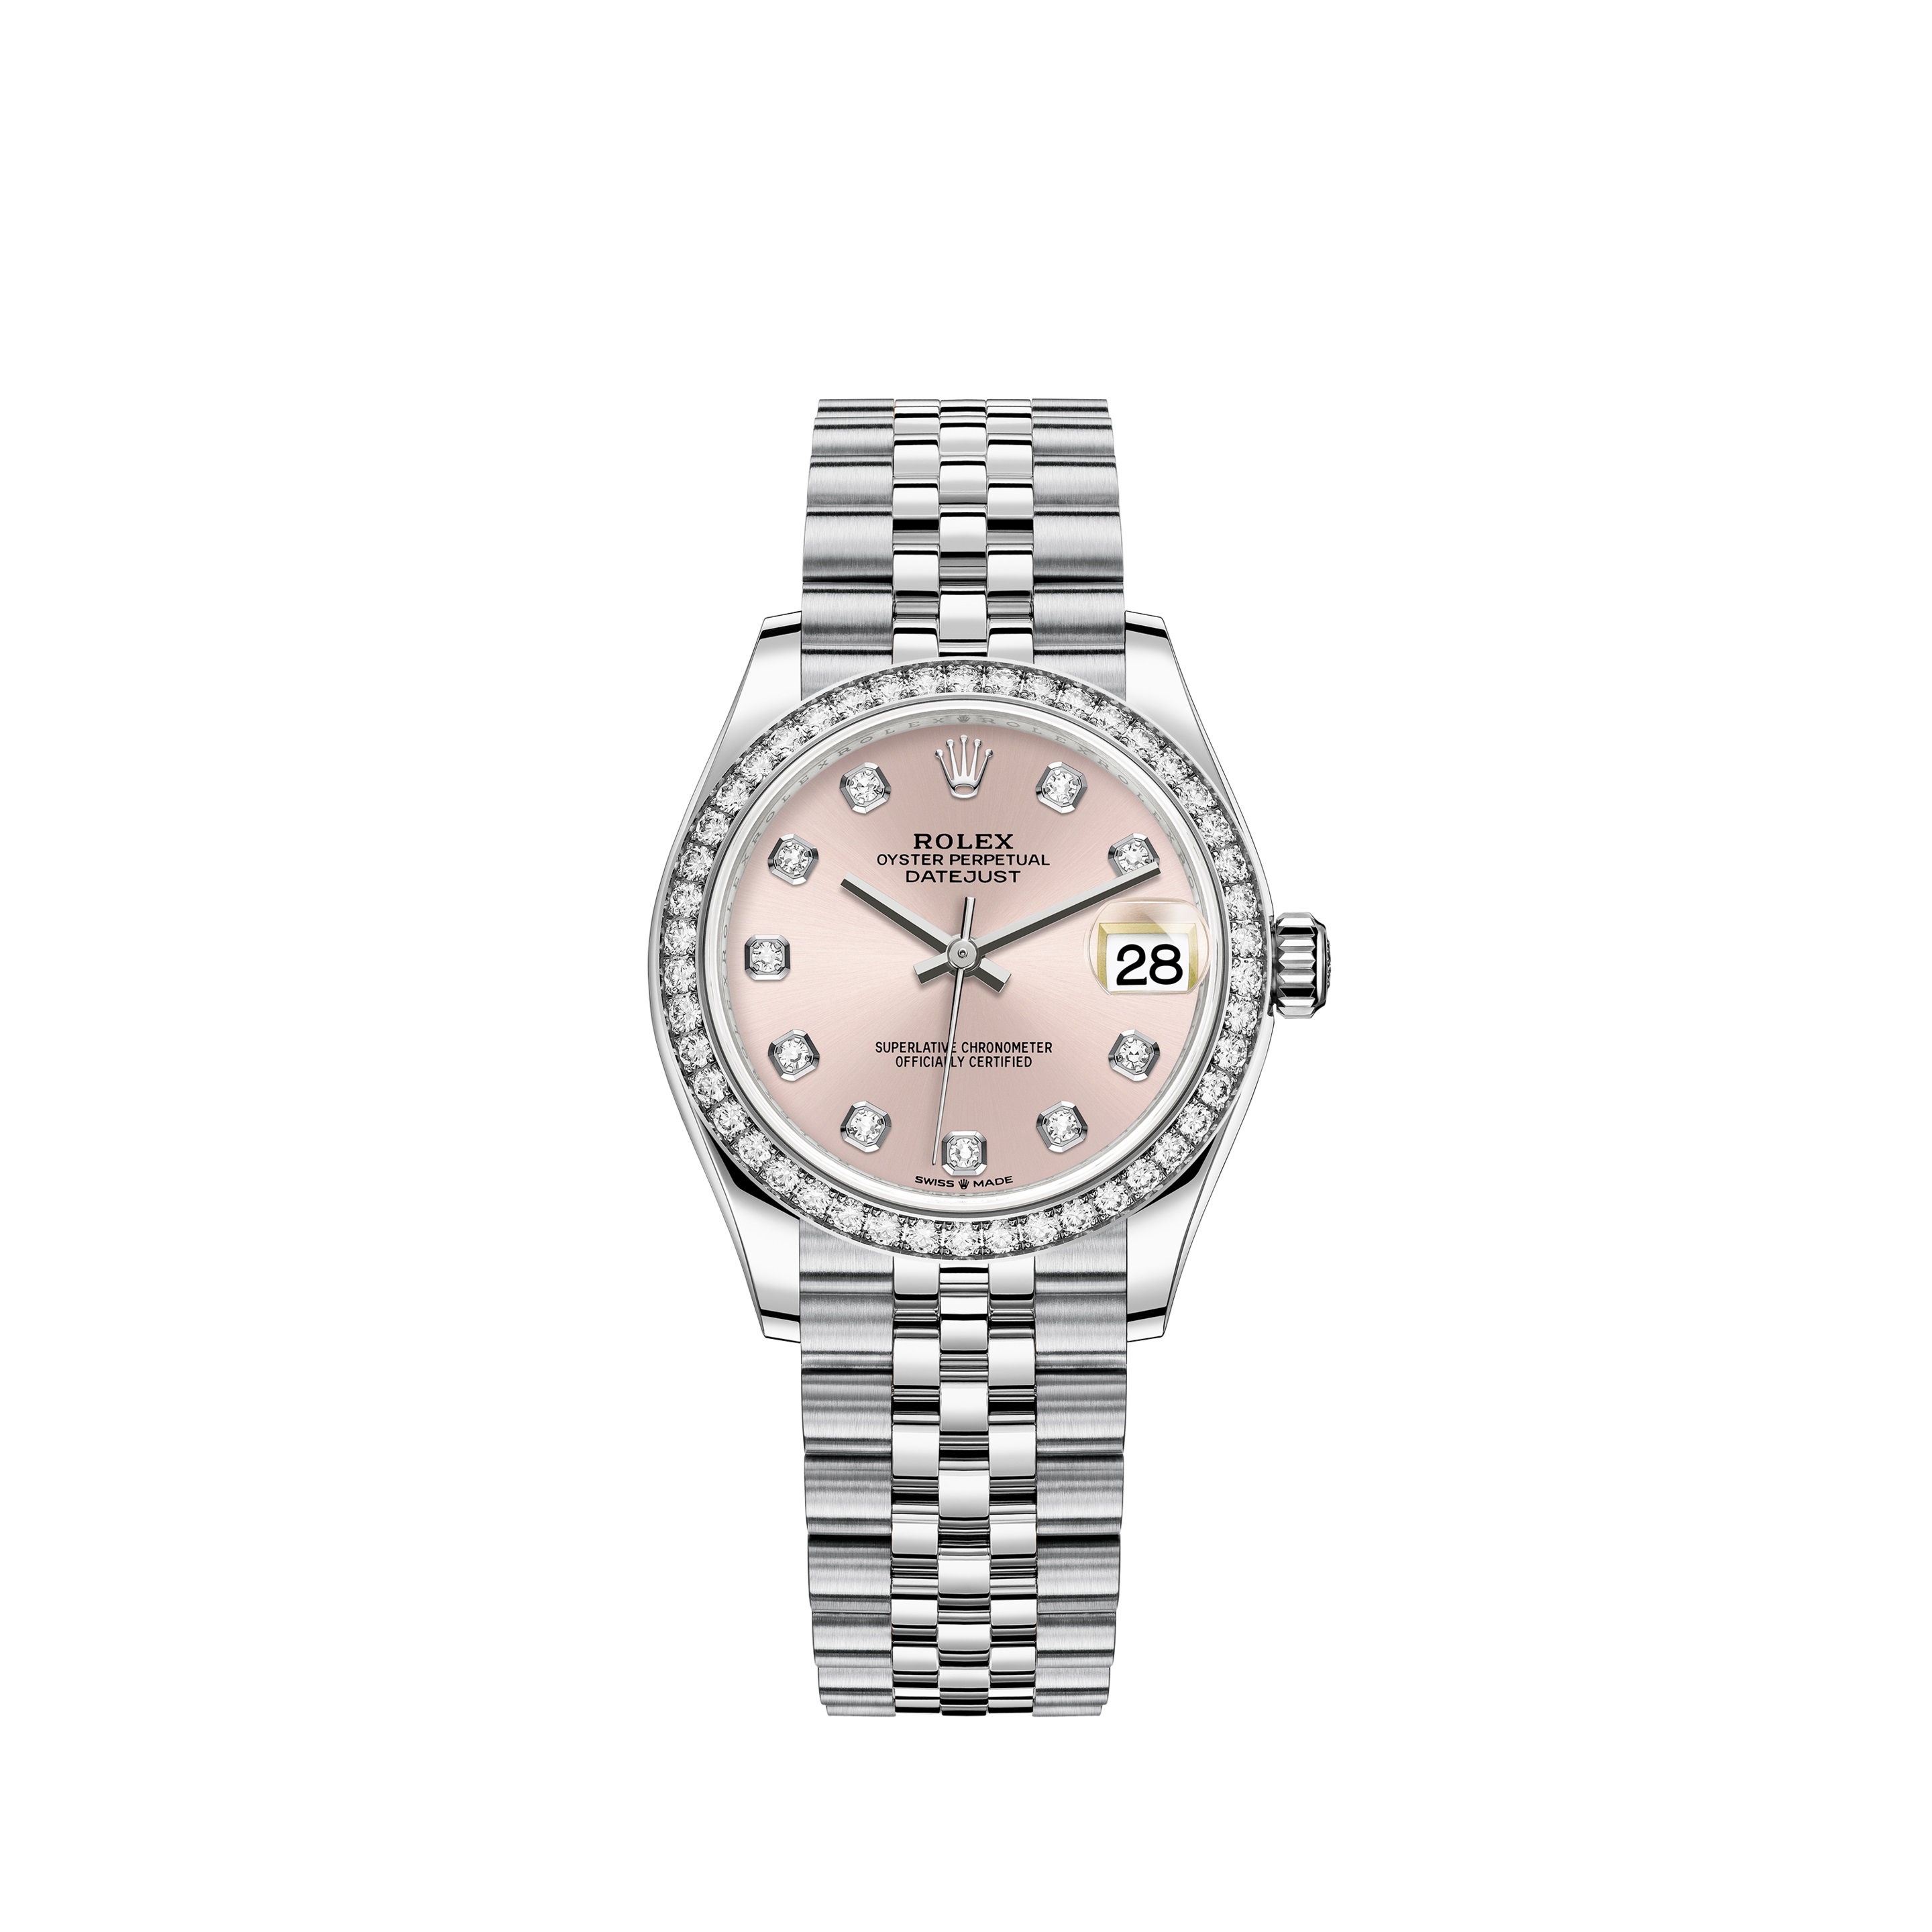 Datejust 31 278384RBR White Gold & Stainless Steel Watch (Pink Set with Diamonds)